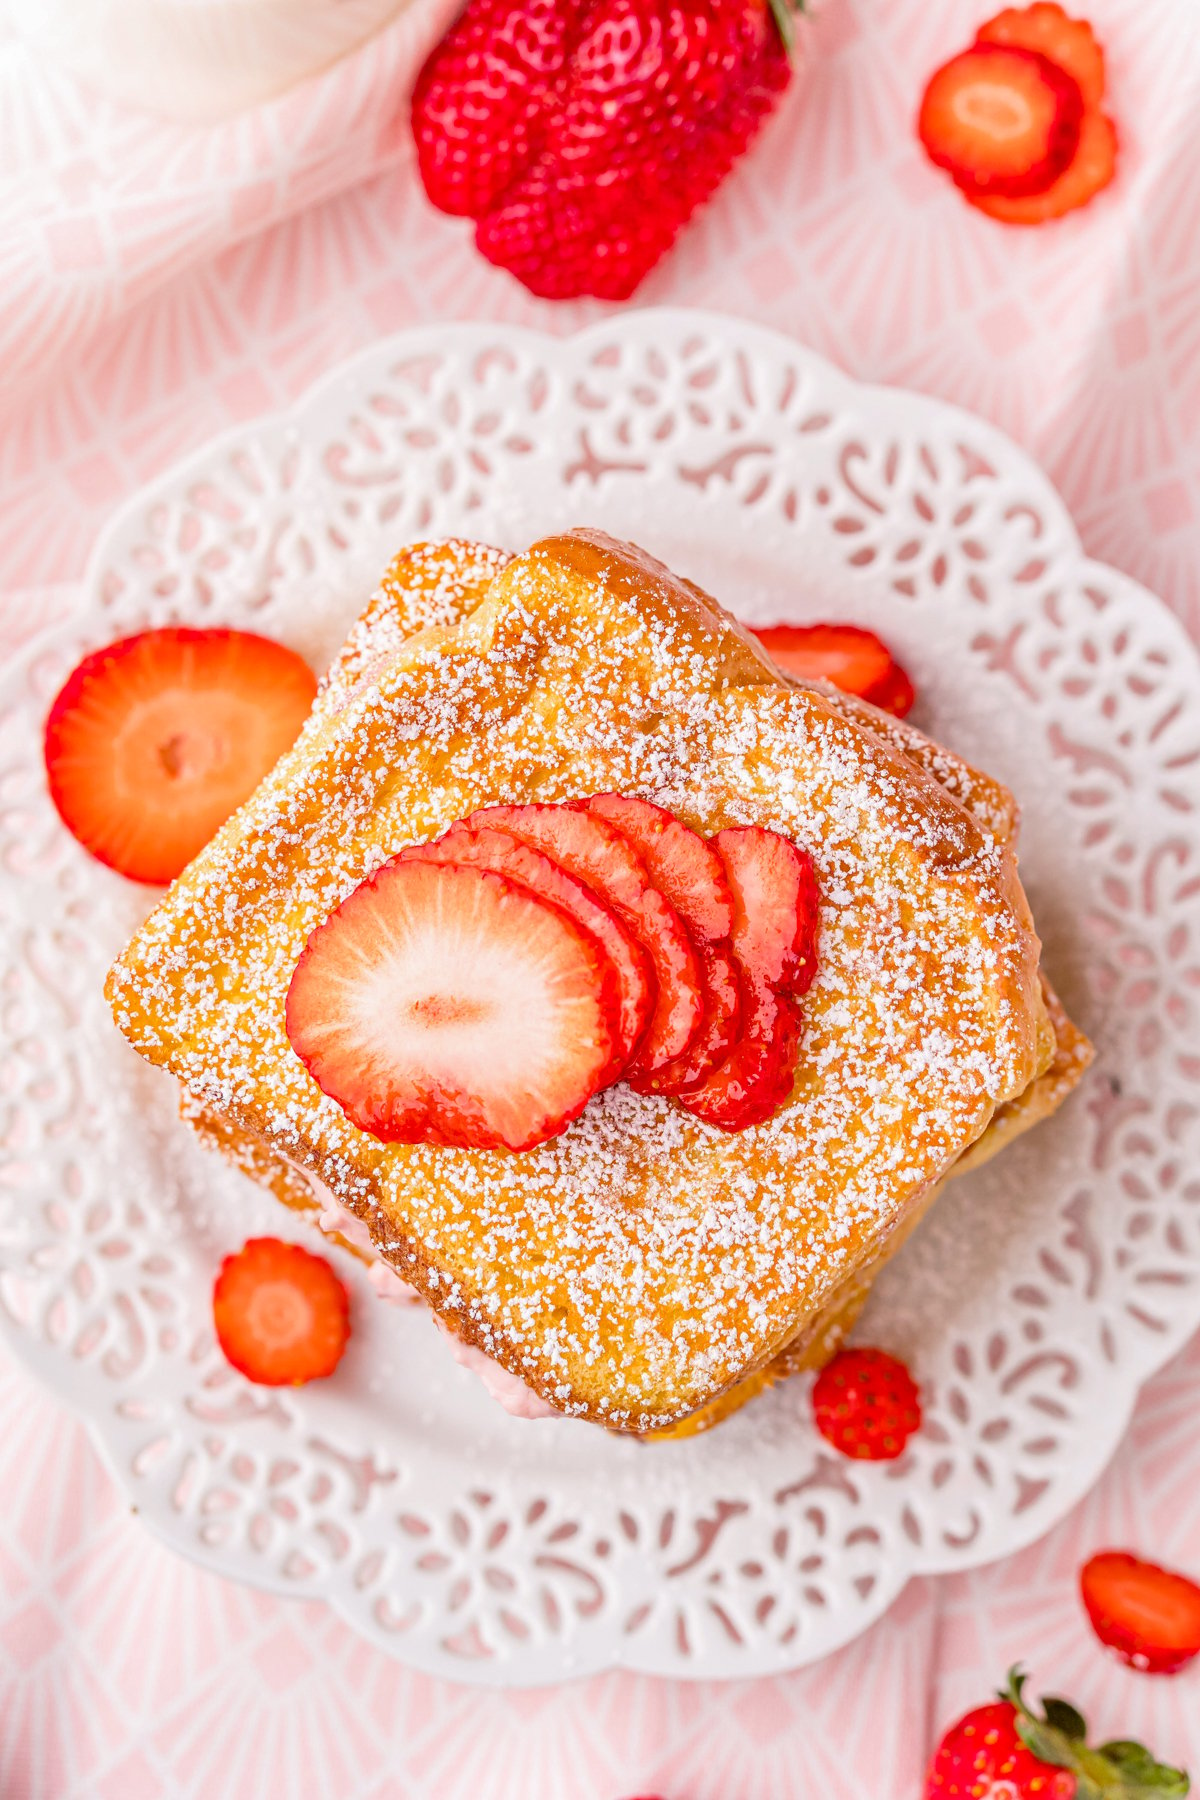 Overhead of French Toast on plate garnished with strawberries